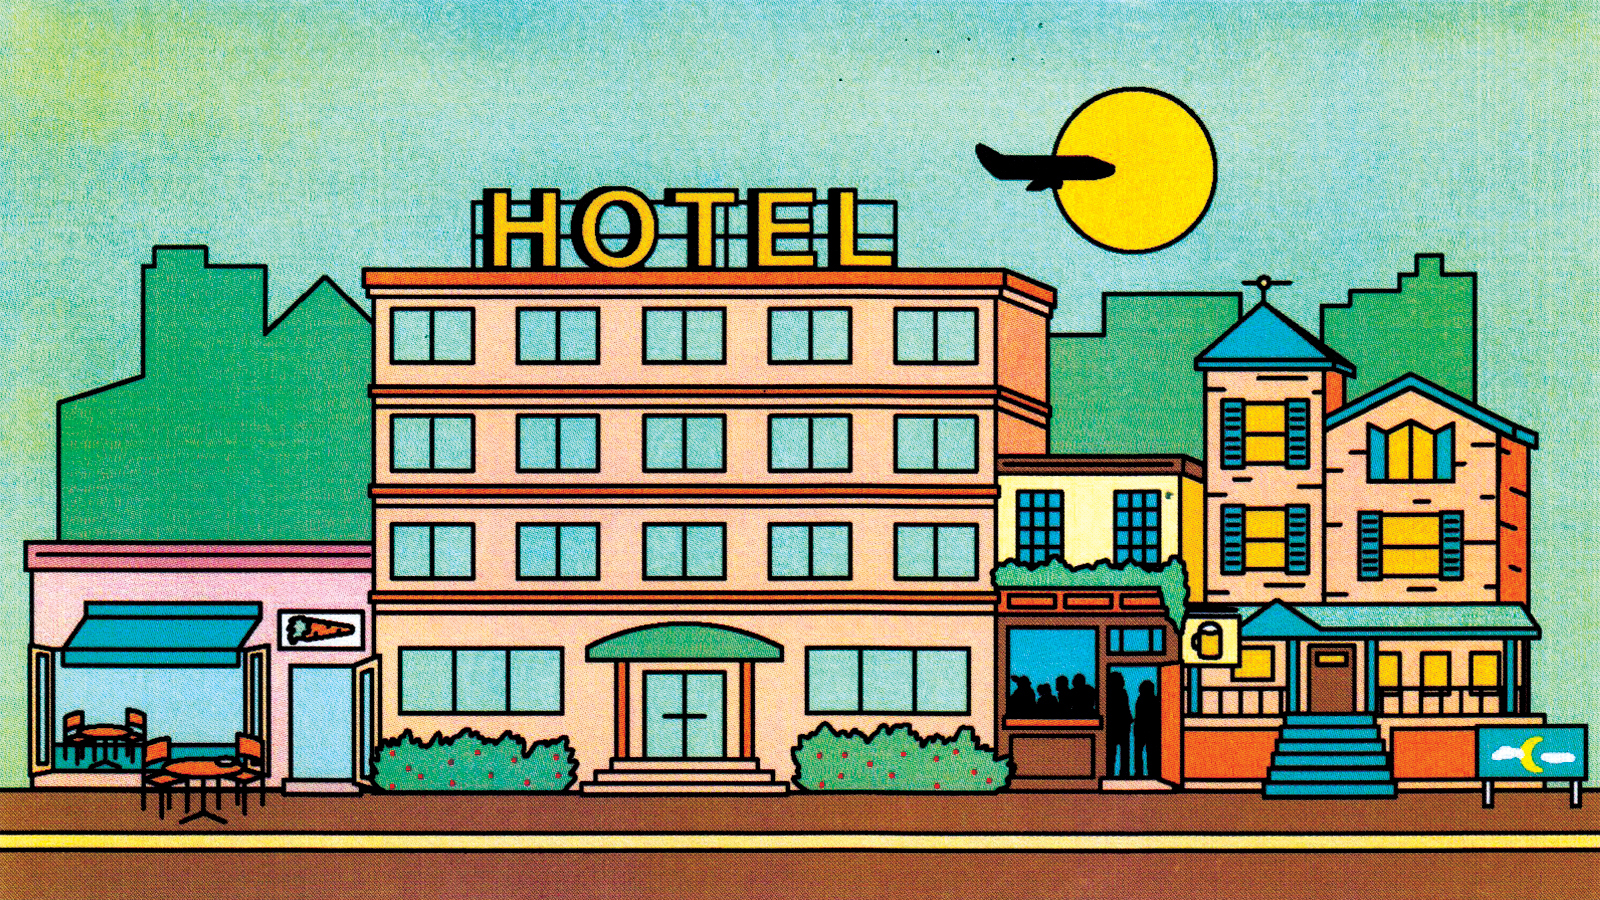 Illustration showing a hotel  on a residential street